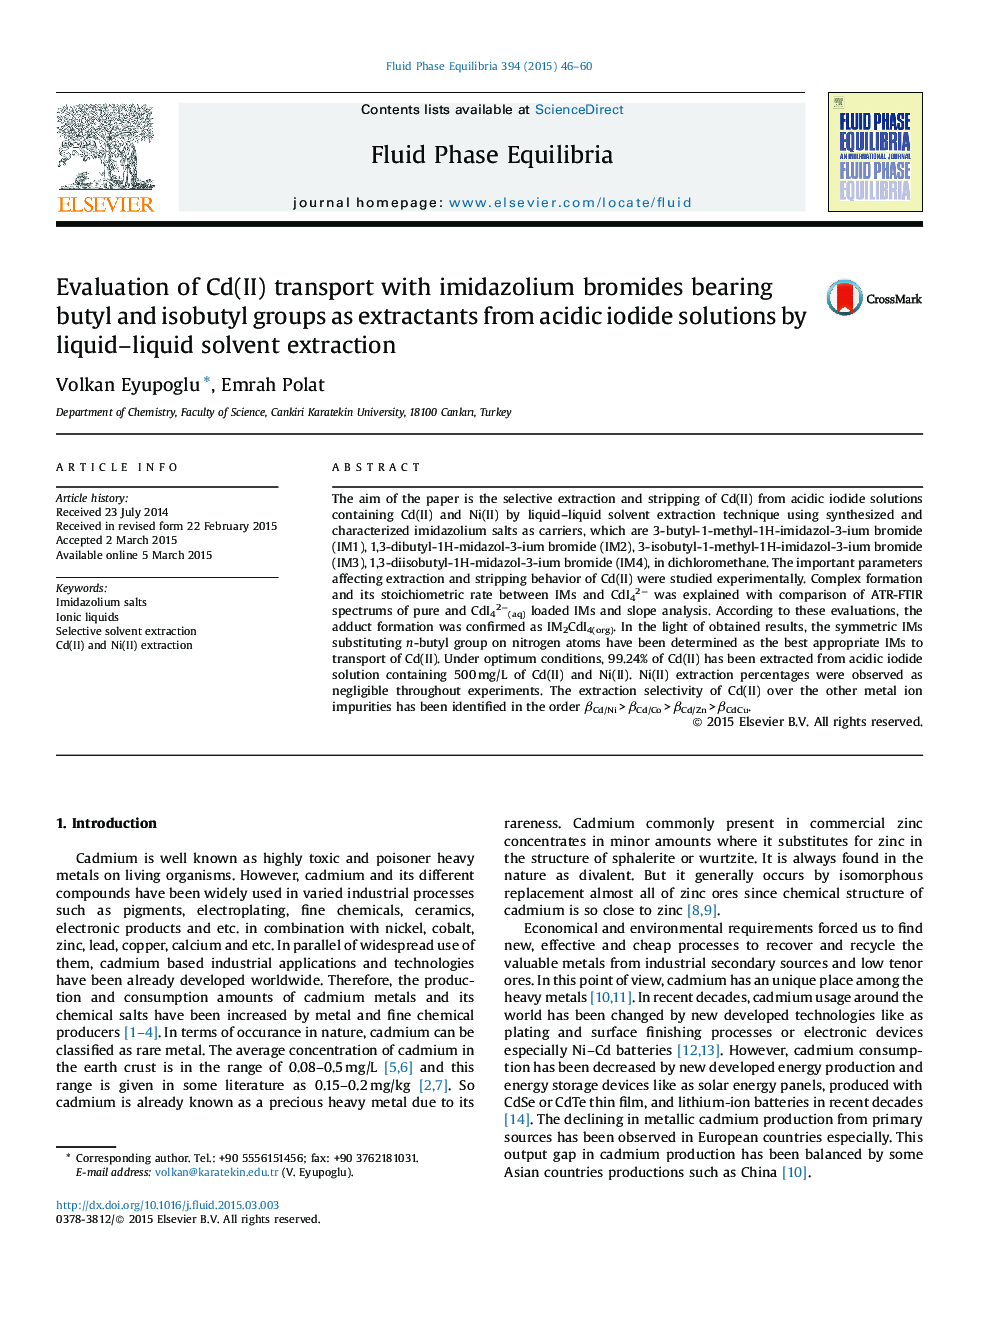 Evaluation of Cd(II) transport with imidazolium bromides bearing butyl and isobutyl groups as extractants from acidic iodide solutions by liquid-liquid solvent extraction